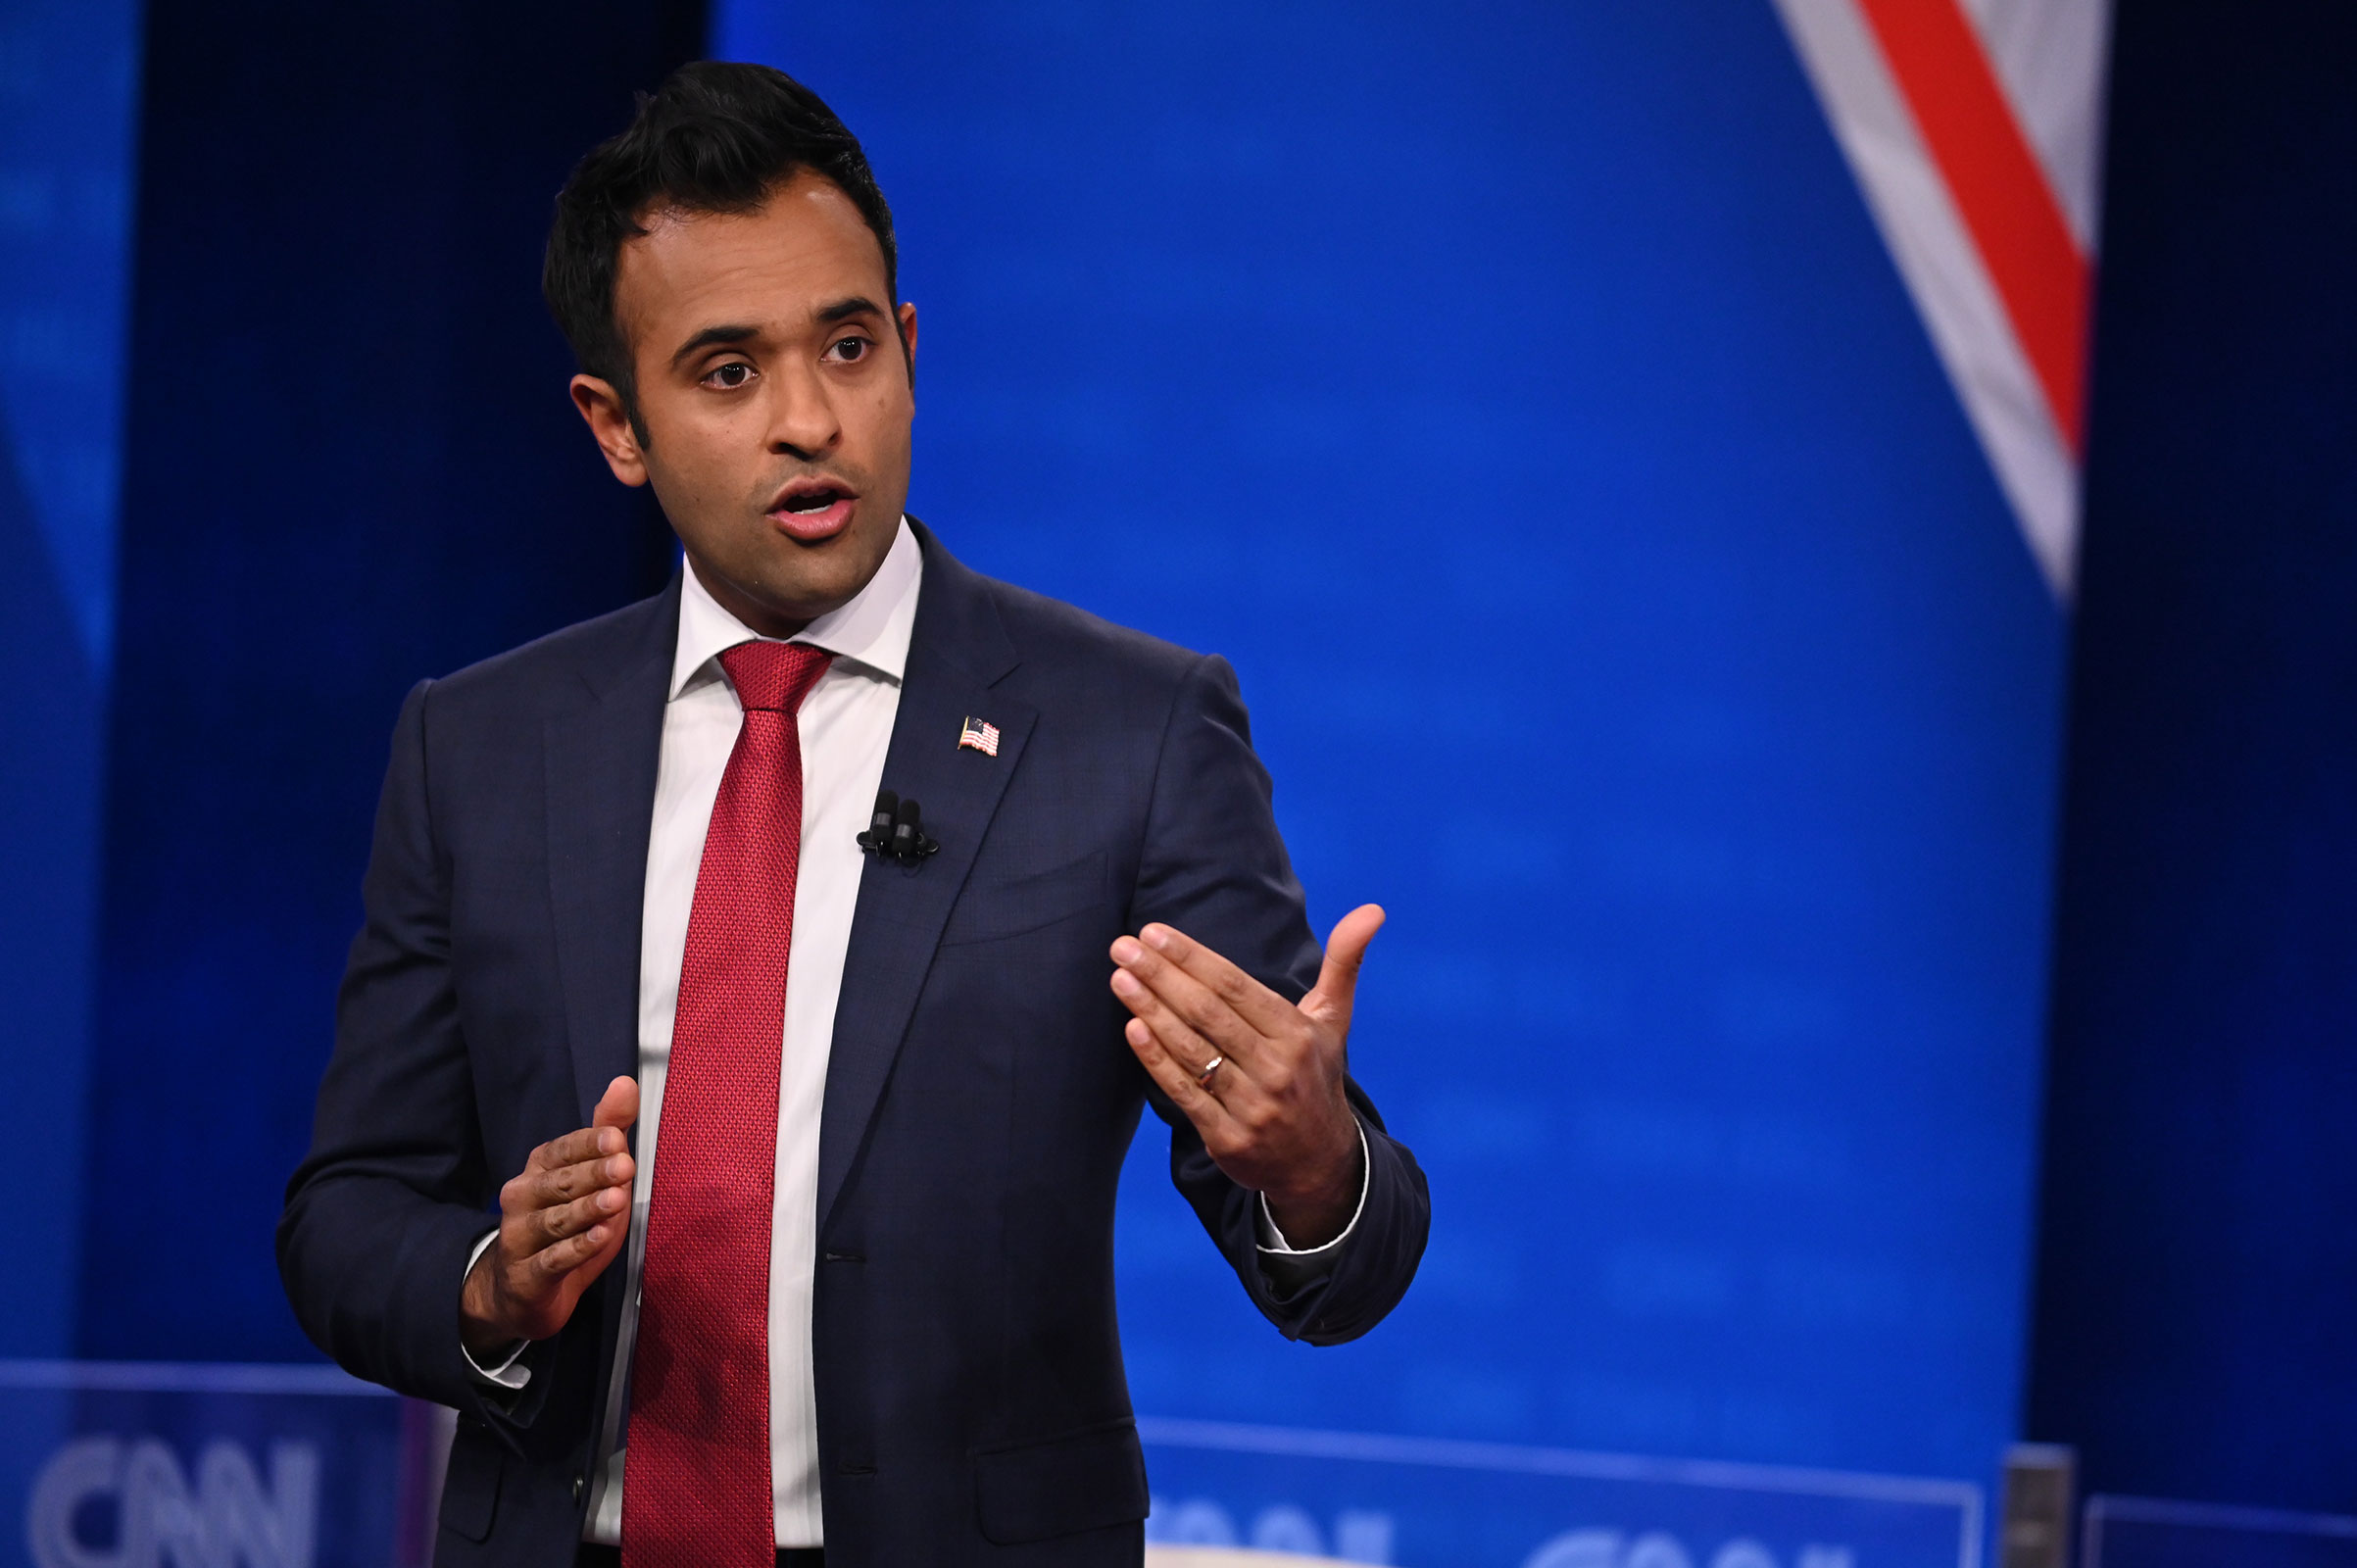 Picking up on a theme he emphasized at the fourth Republican presidential primary debate last week, Vivek Ramaswamy embraced a series of conspiracy theories.